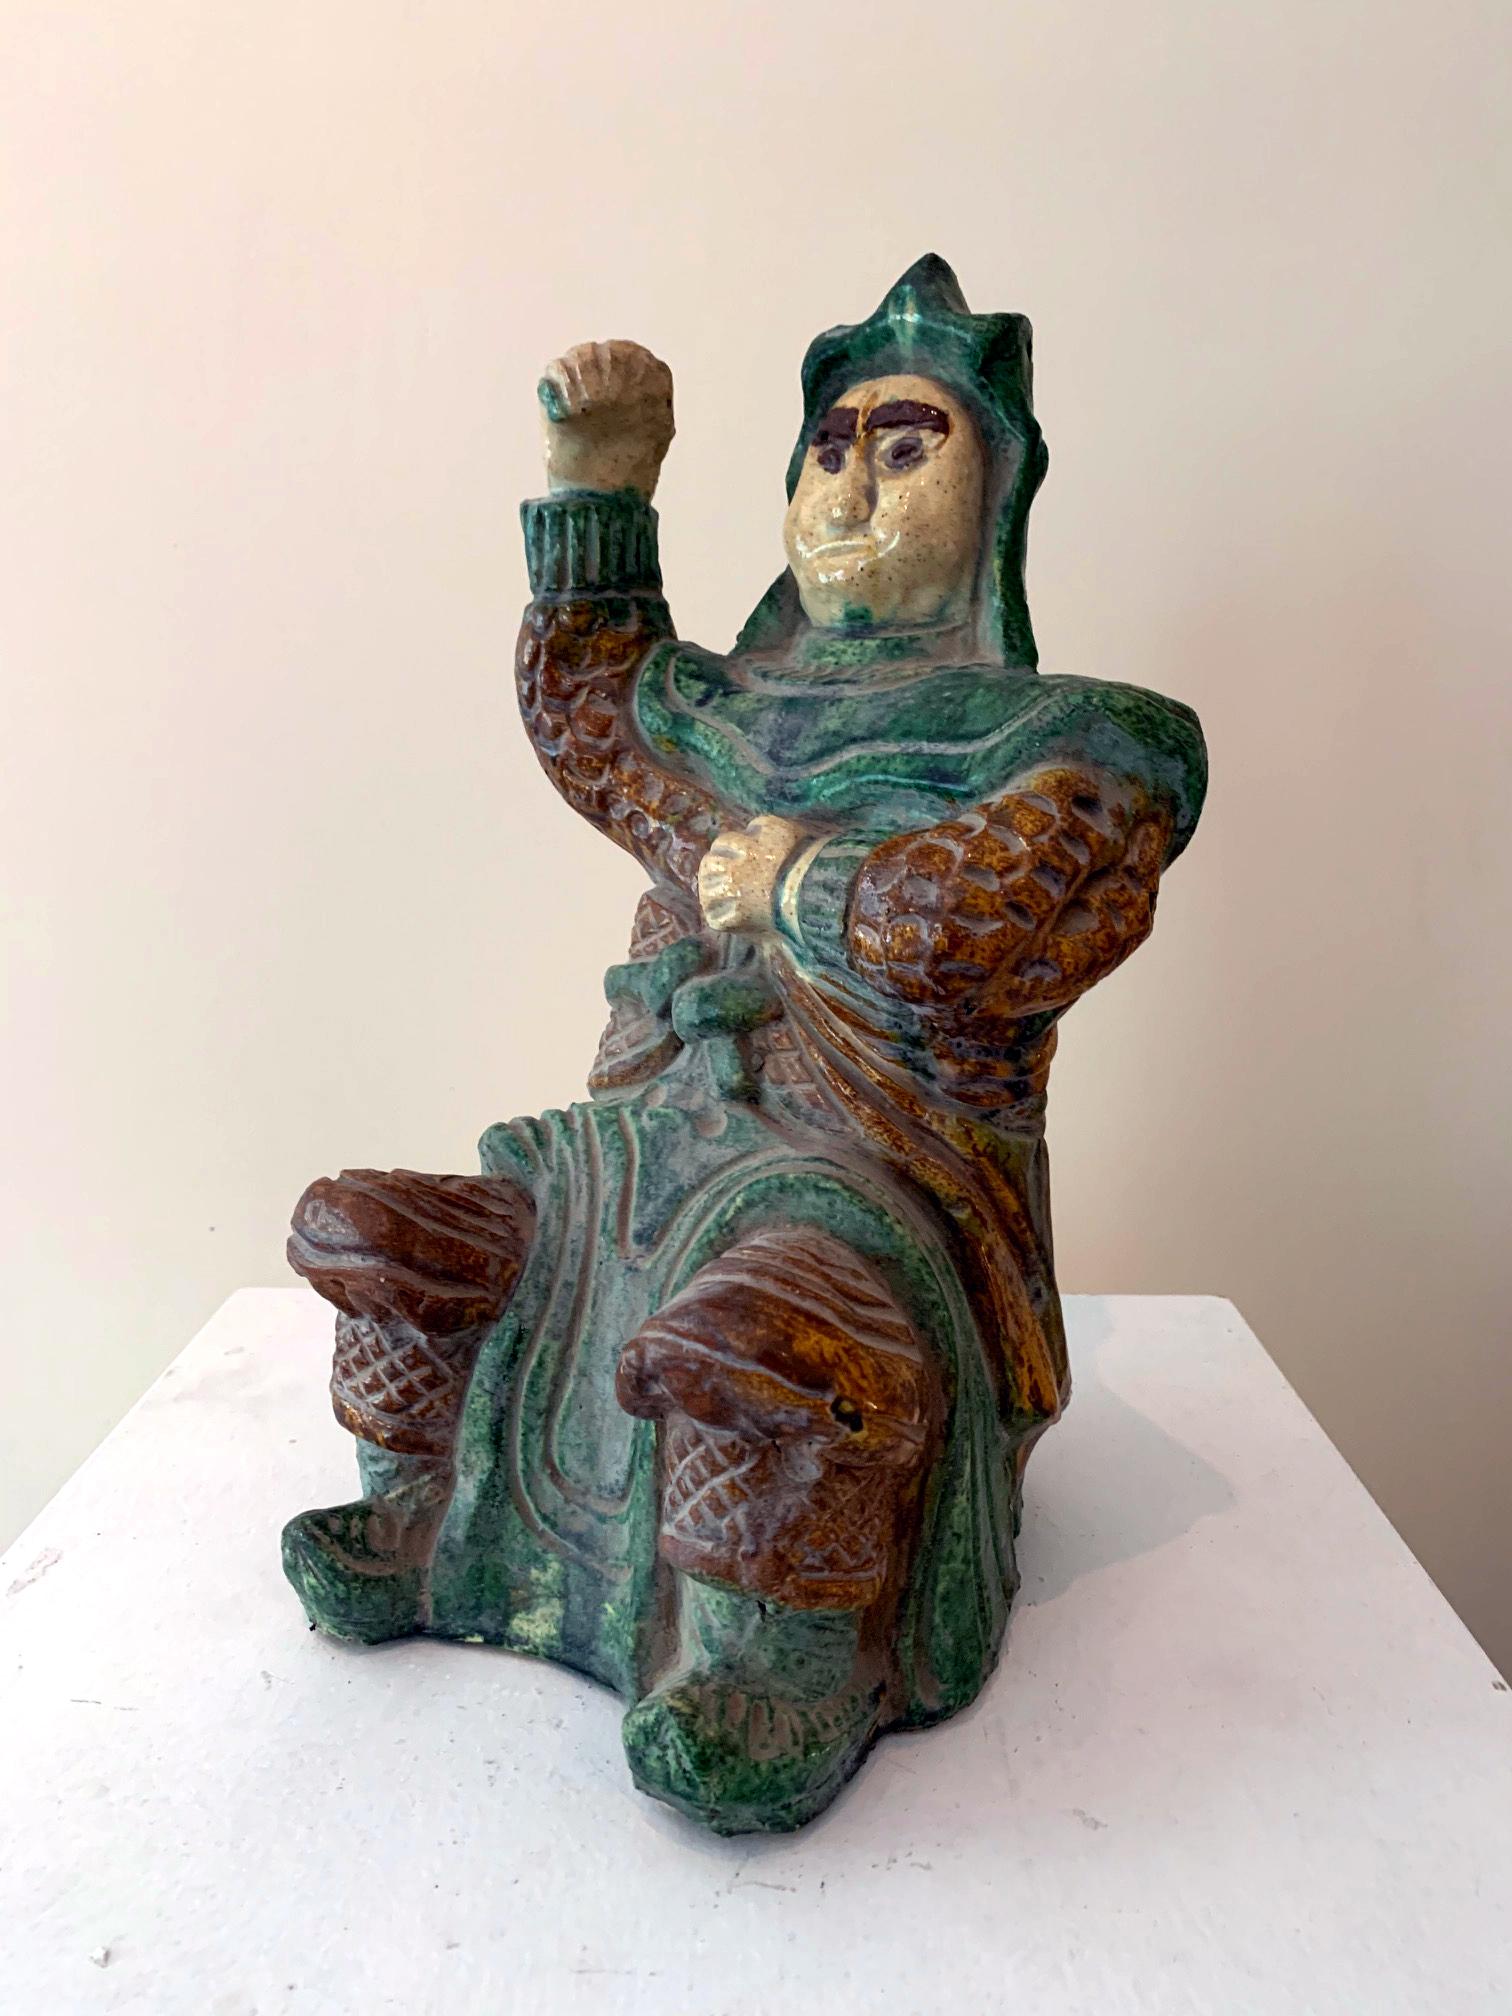 A stoneware figure depicting a seated armored warrior with a striking pose circa 15th-17th century. He is likely one of the four heavenly kings, the protective guardians widely worshiped in China. This figure was heavily molded by hand and the